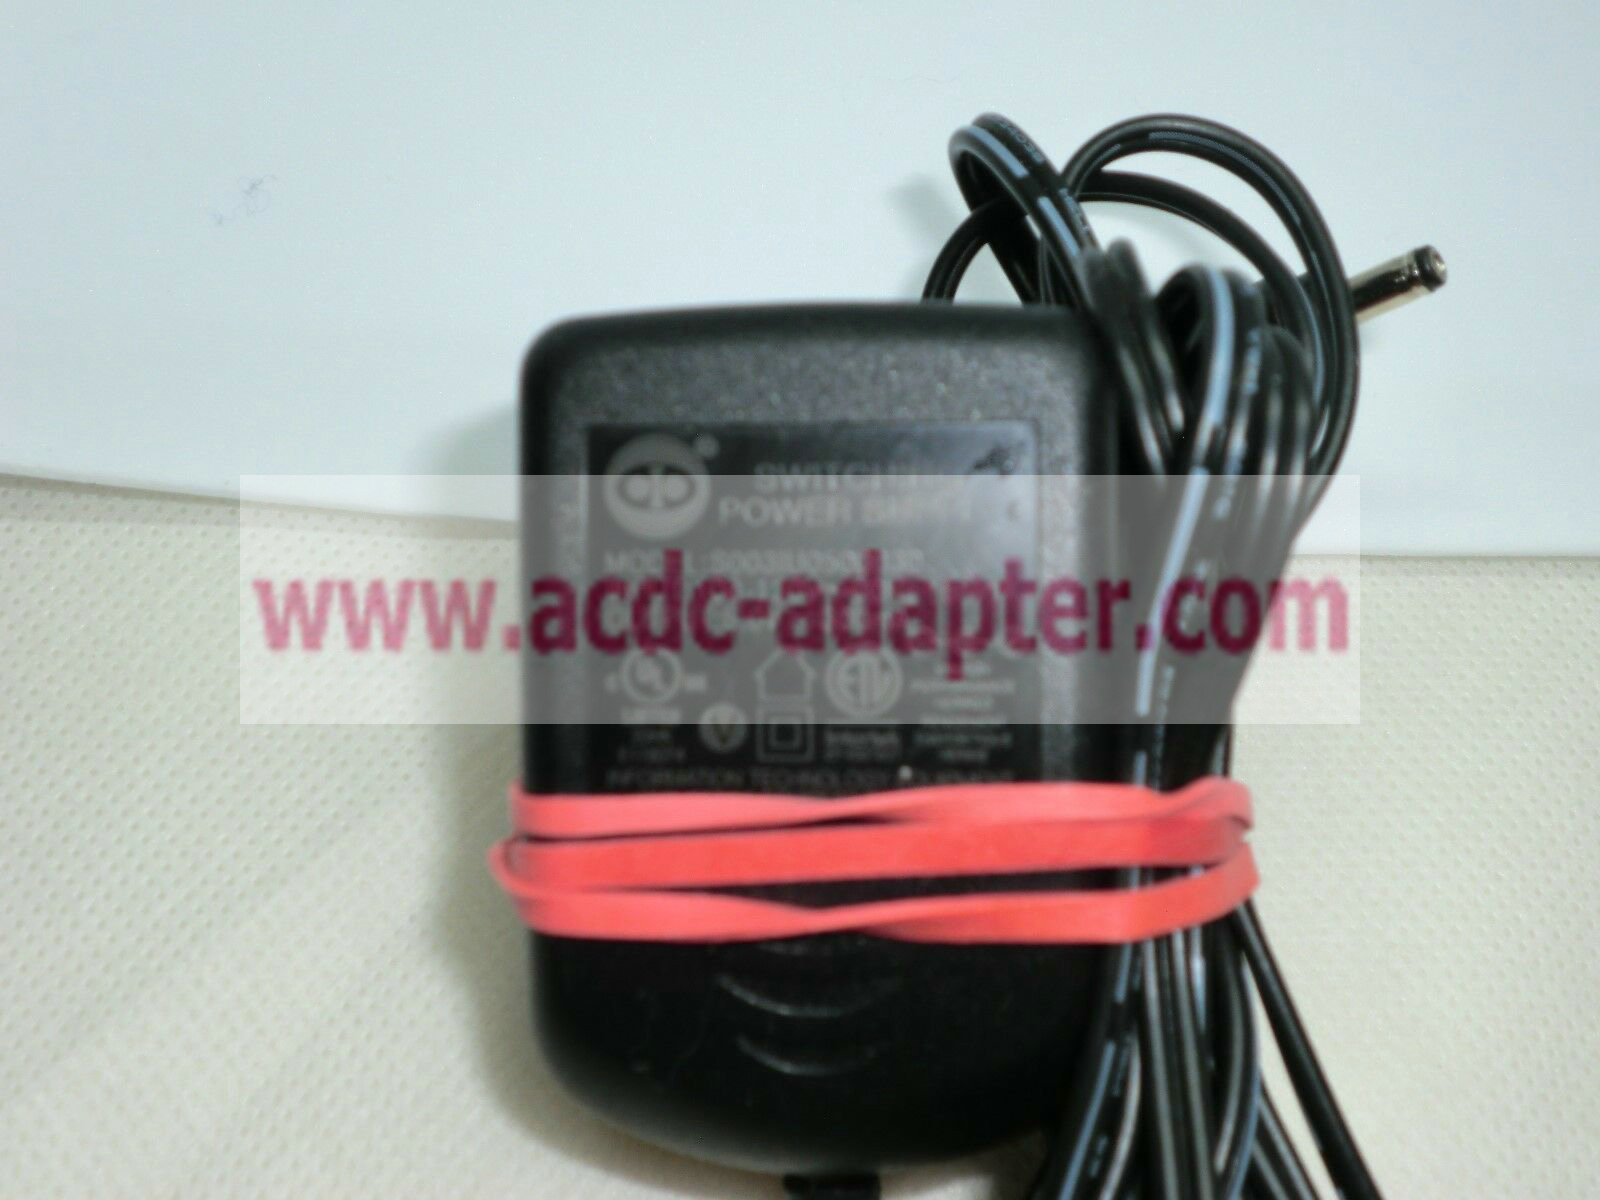 Genuine DC5V 300mA ac adapter for VTECH AT&T S003IU0500030 SWITCHING POWER SUPPLY